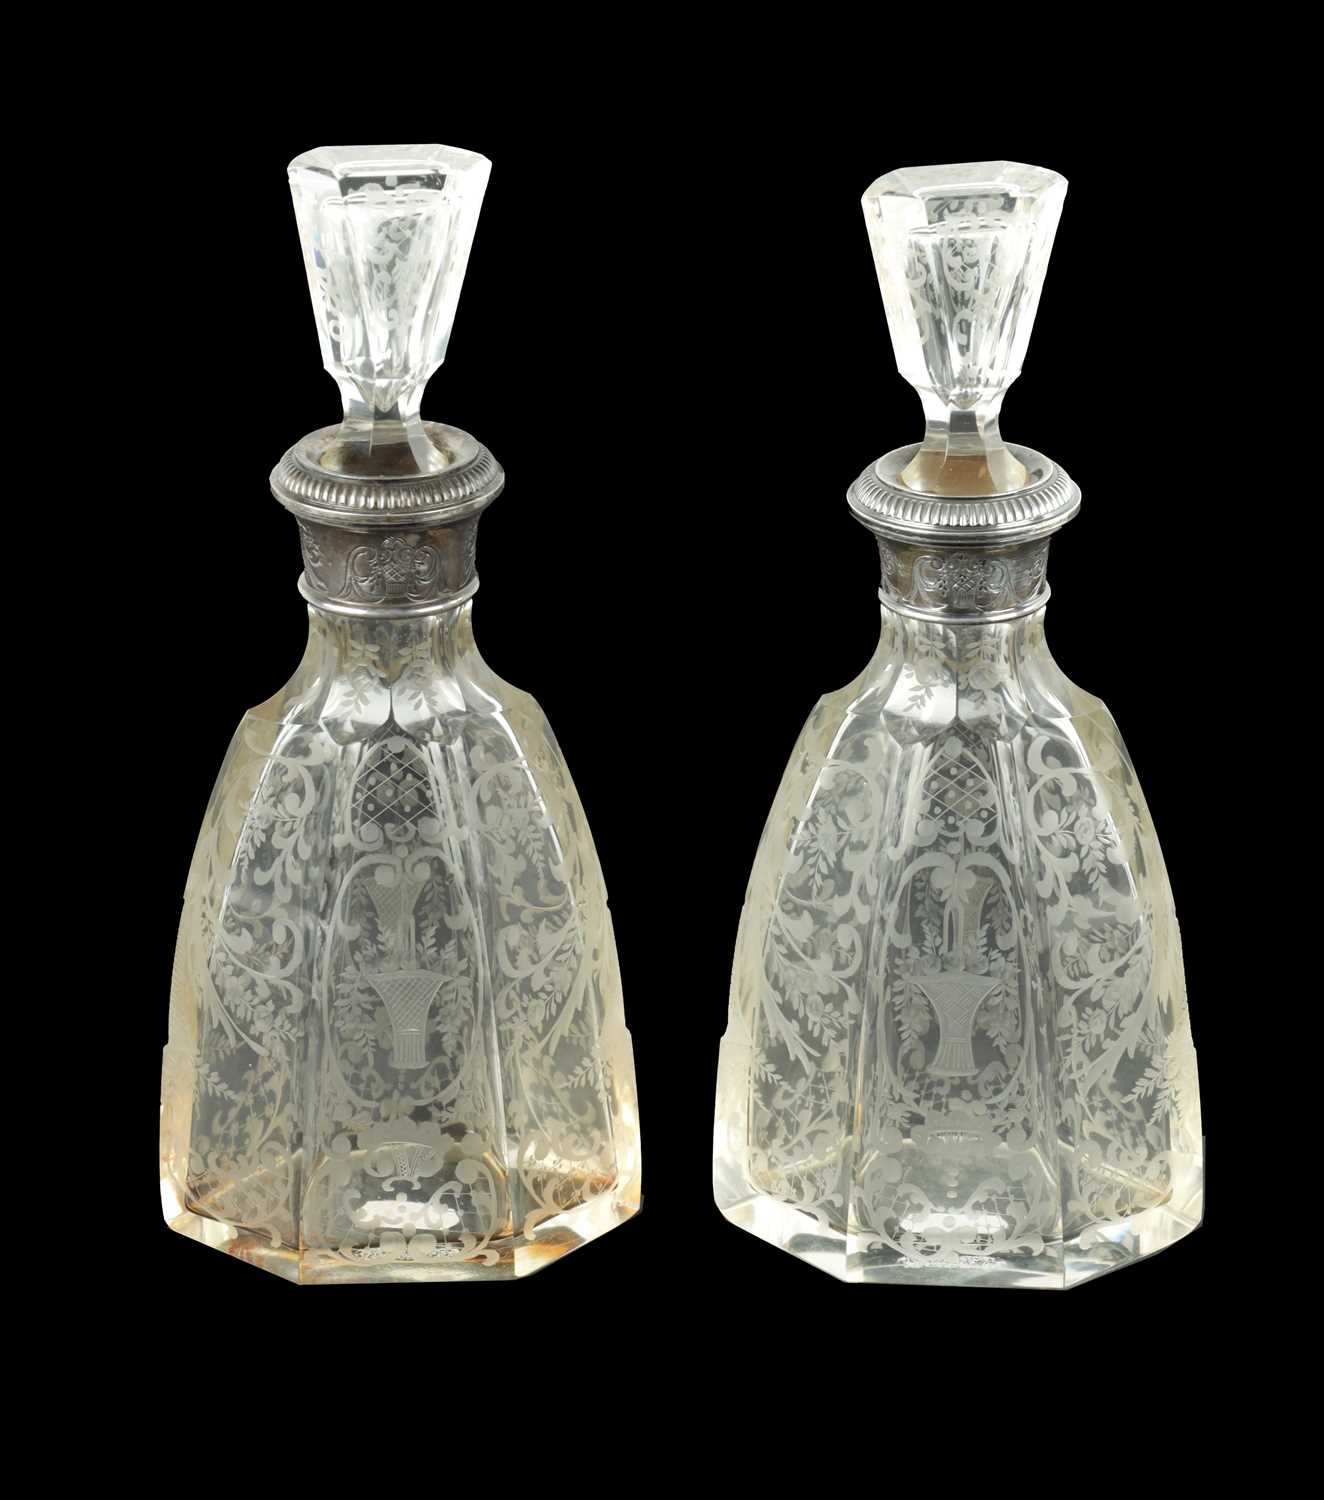 Lot 677 - A NEAR PAIR OF 19TH CENTURY SILVER TOPPED CUT GLASS DECANTERS